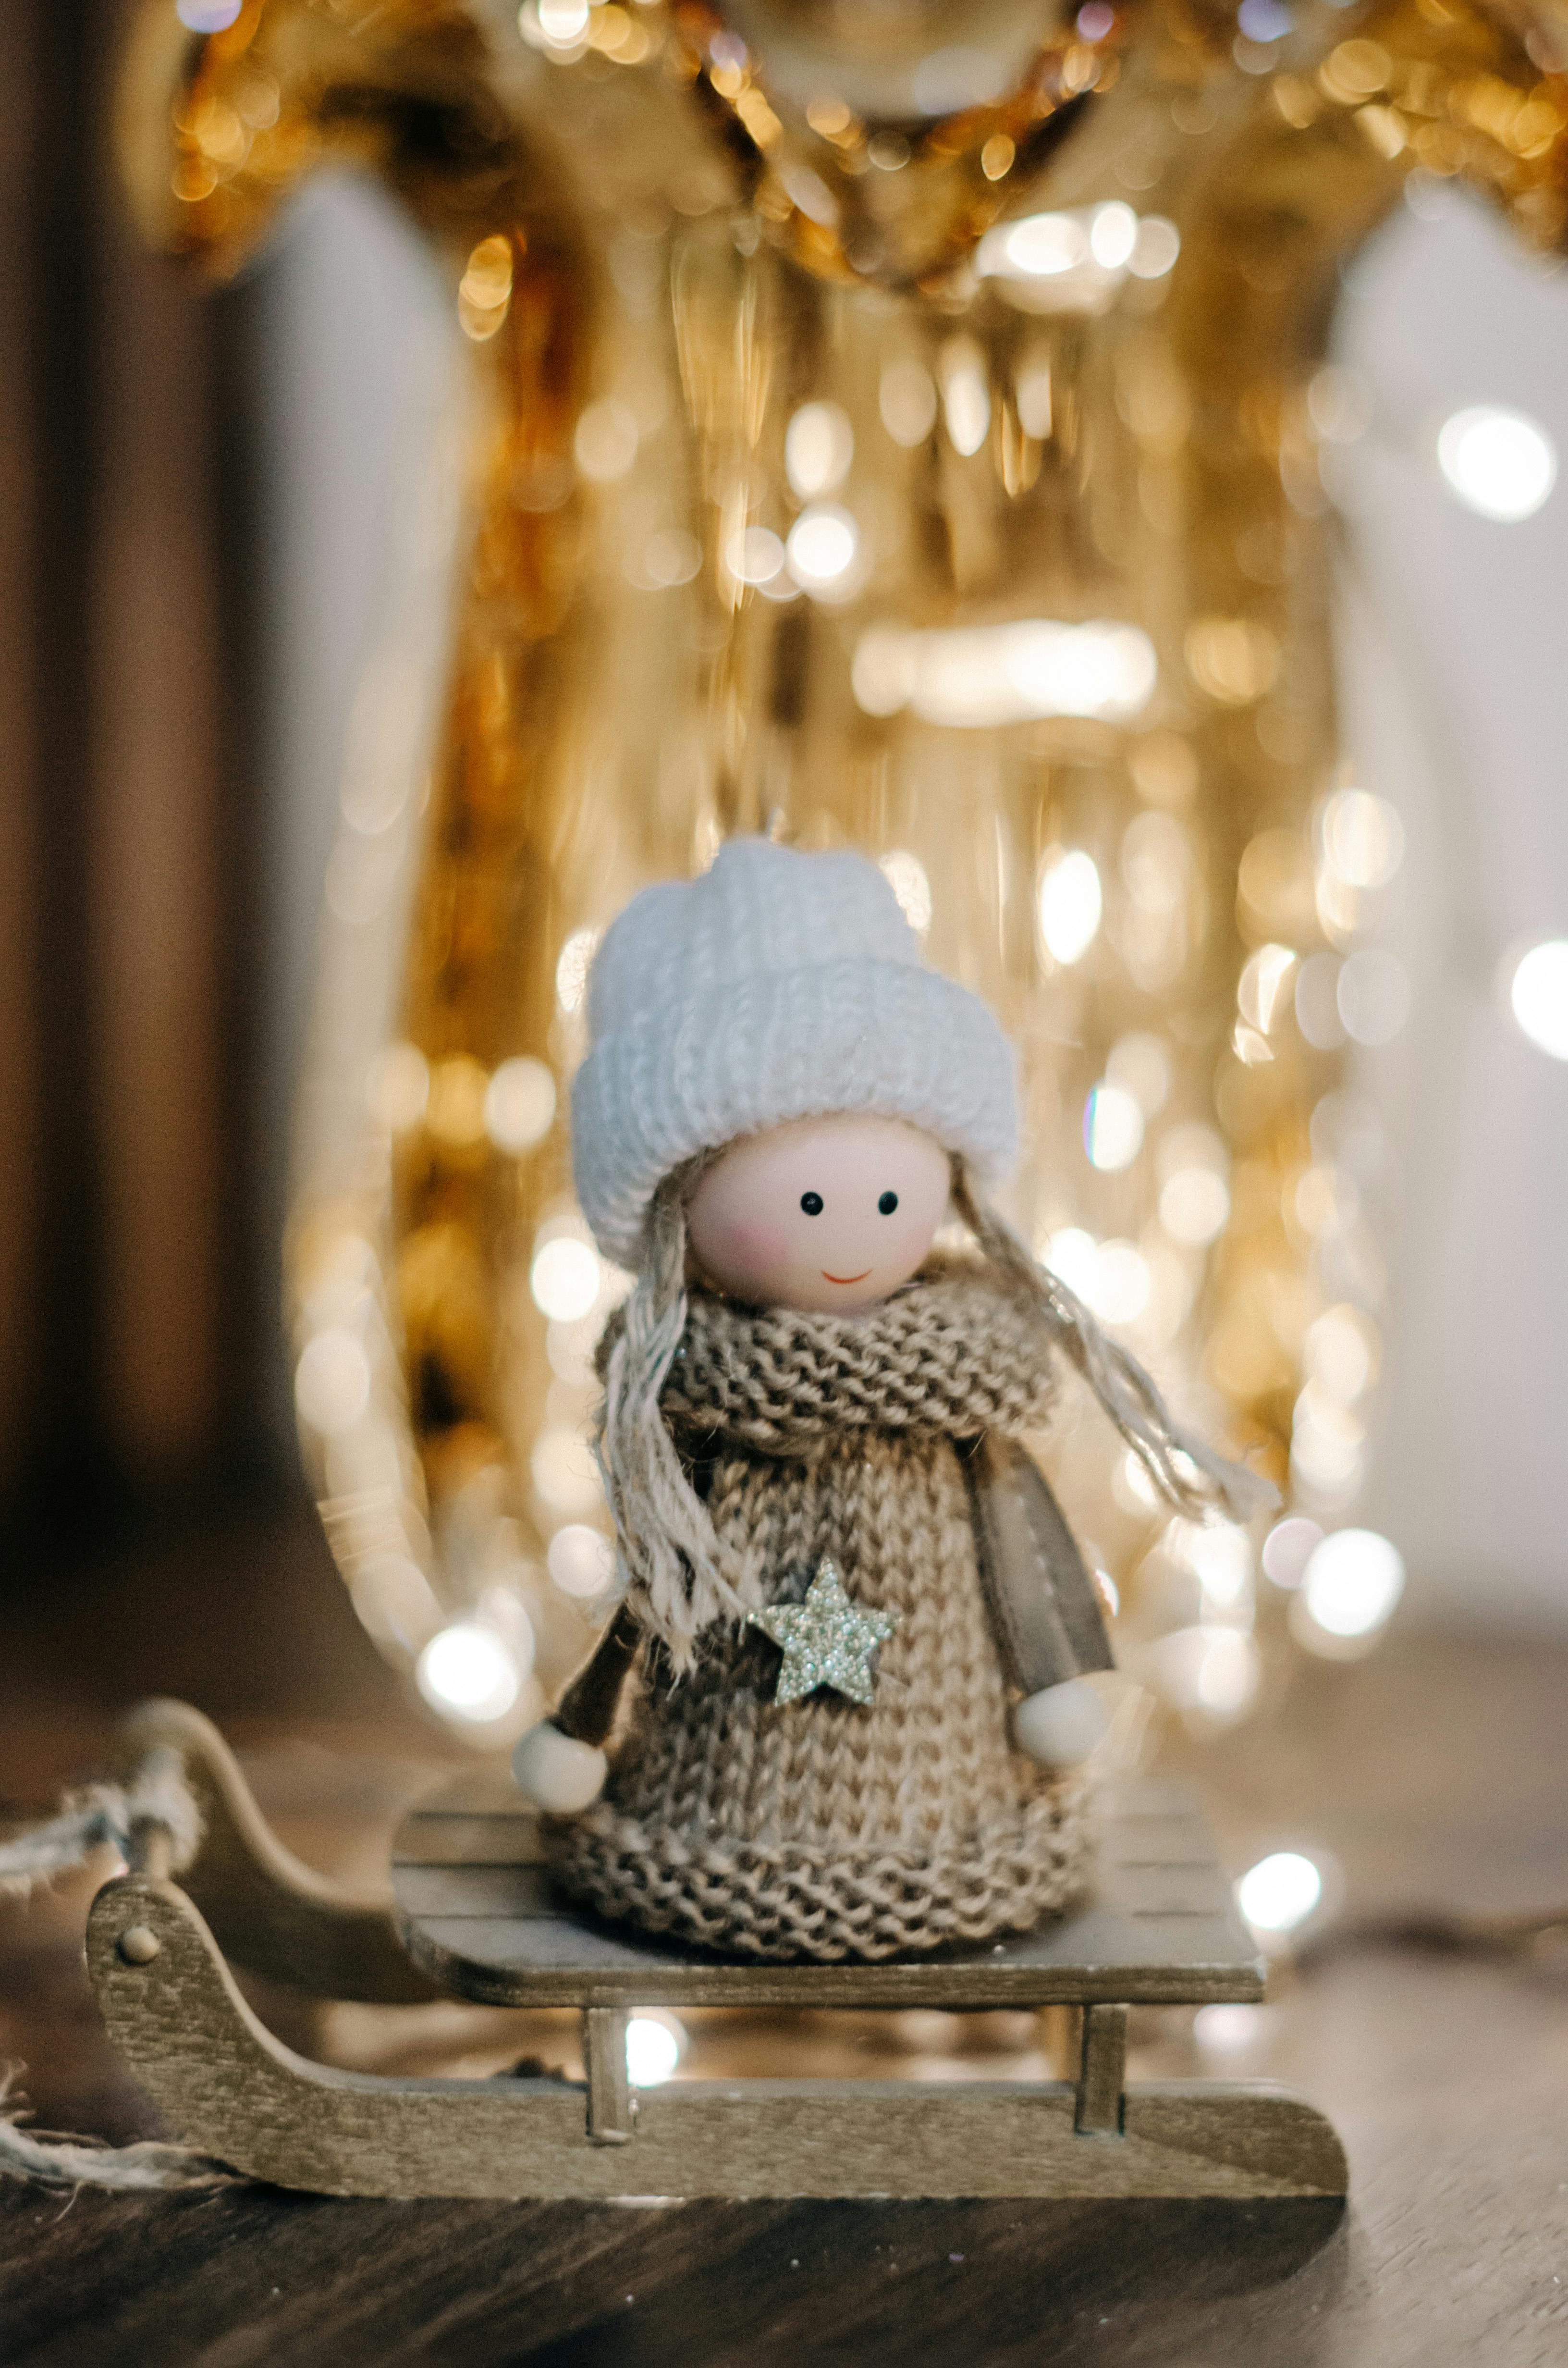 A knitted doll | Source: Pexels